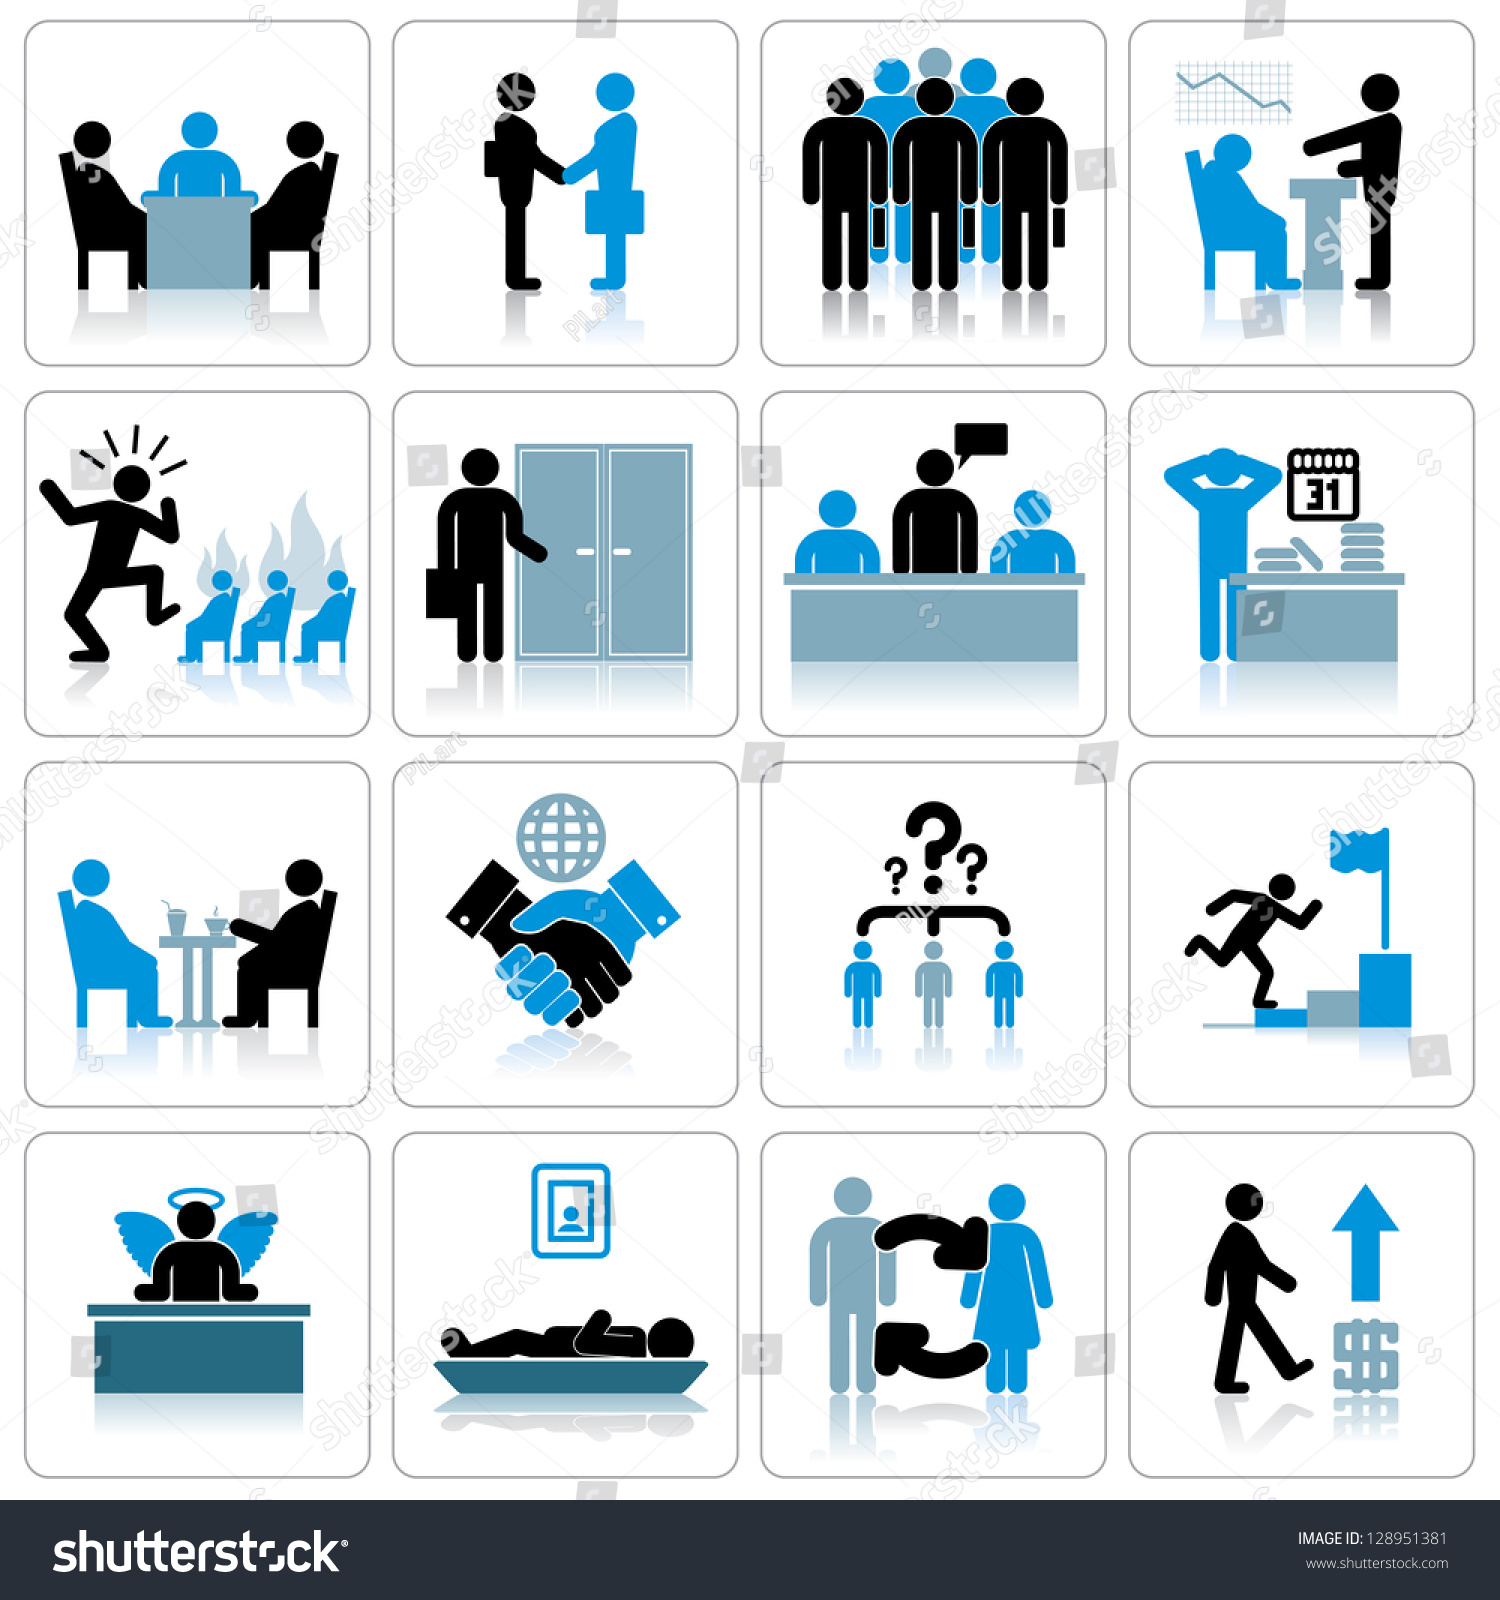 free business management clipart - photo #39